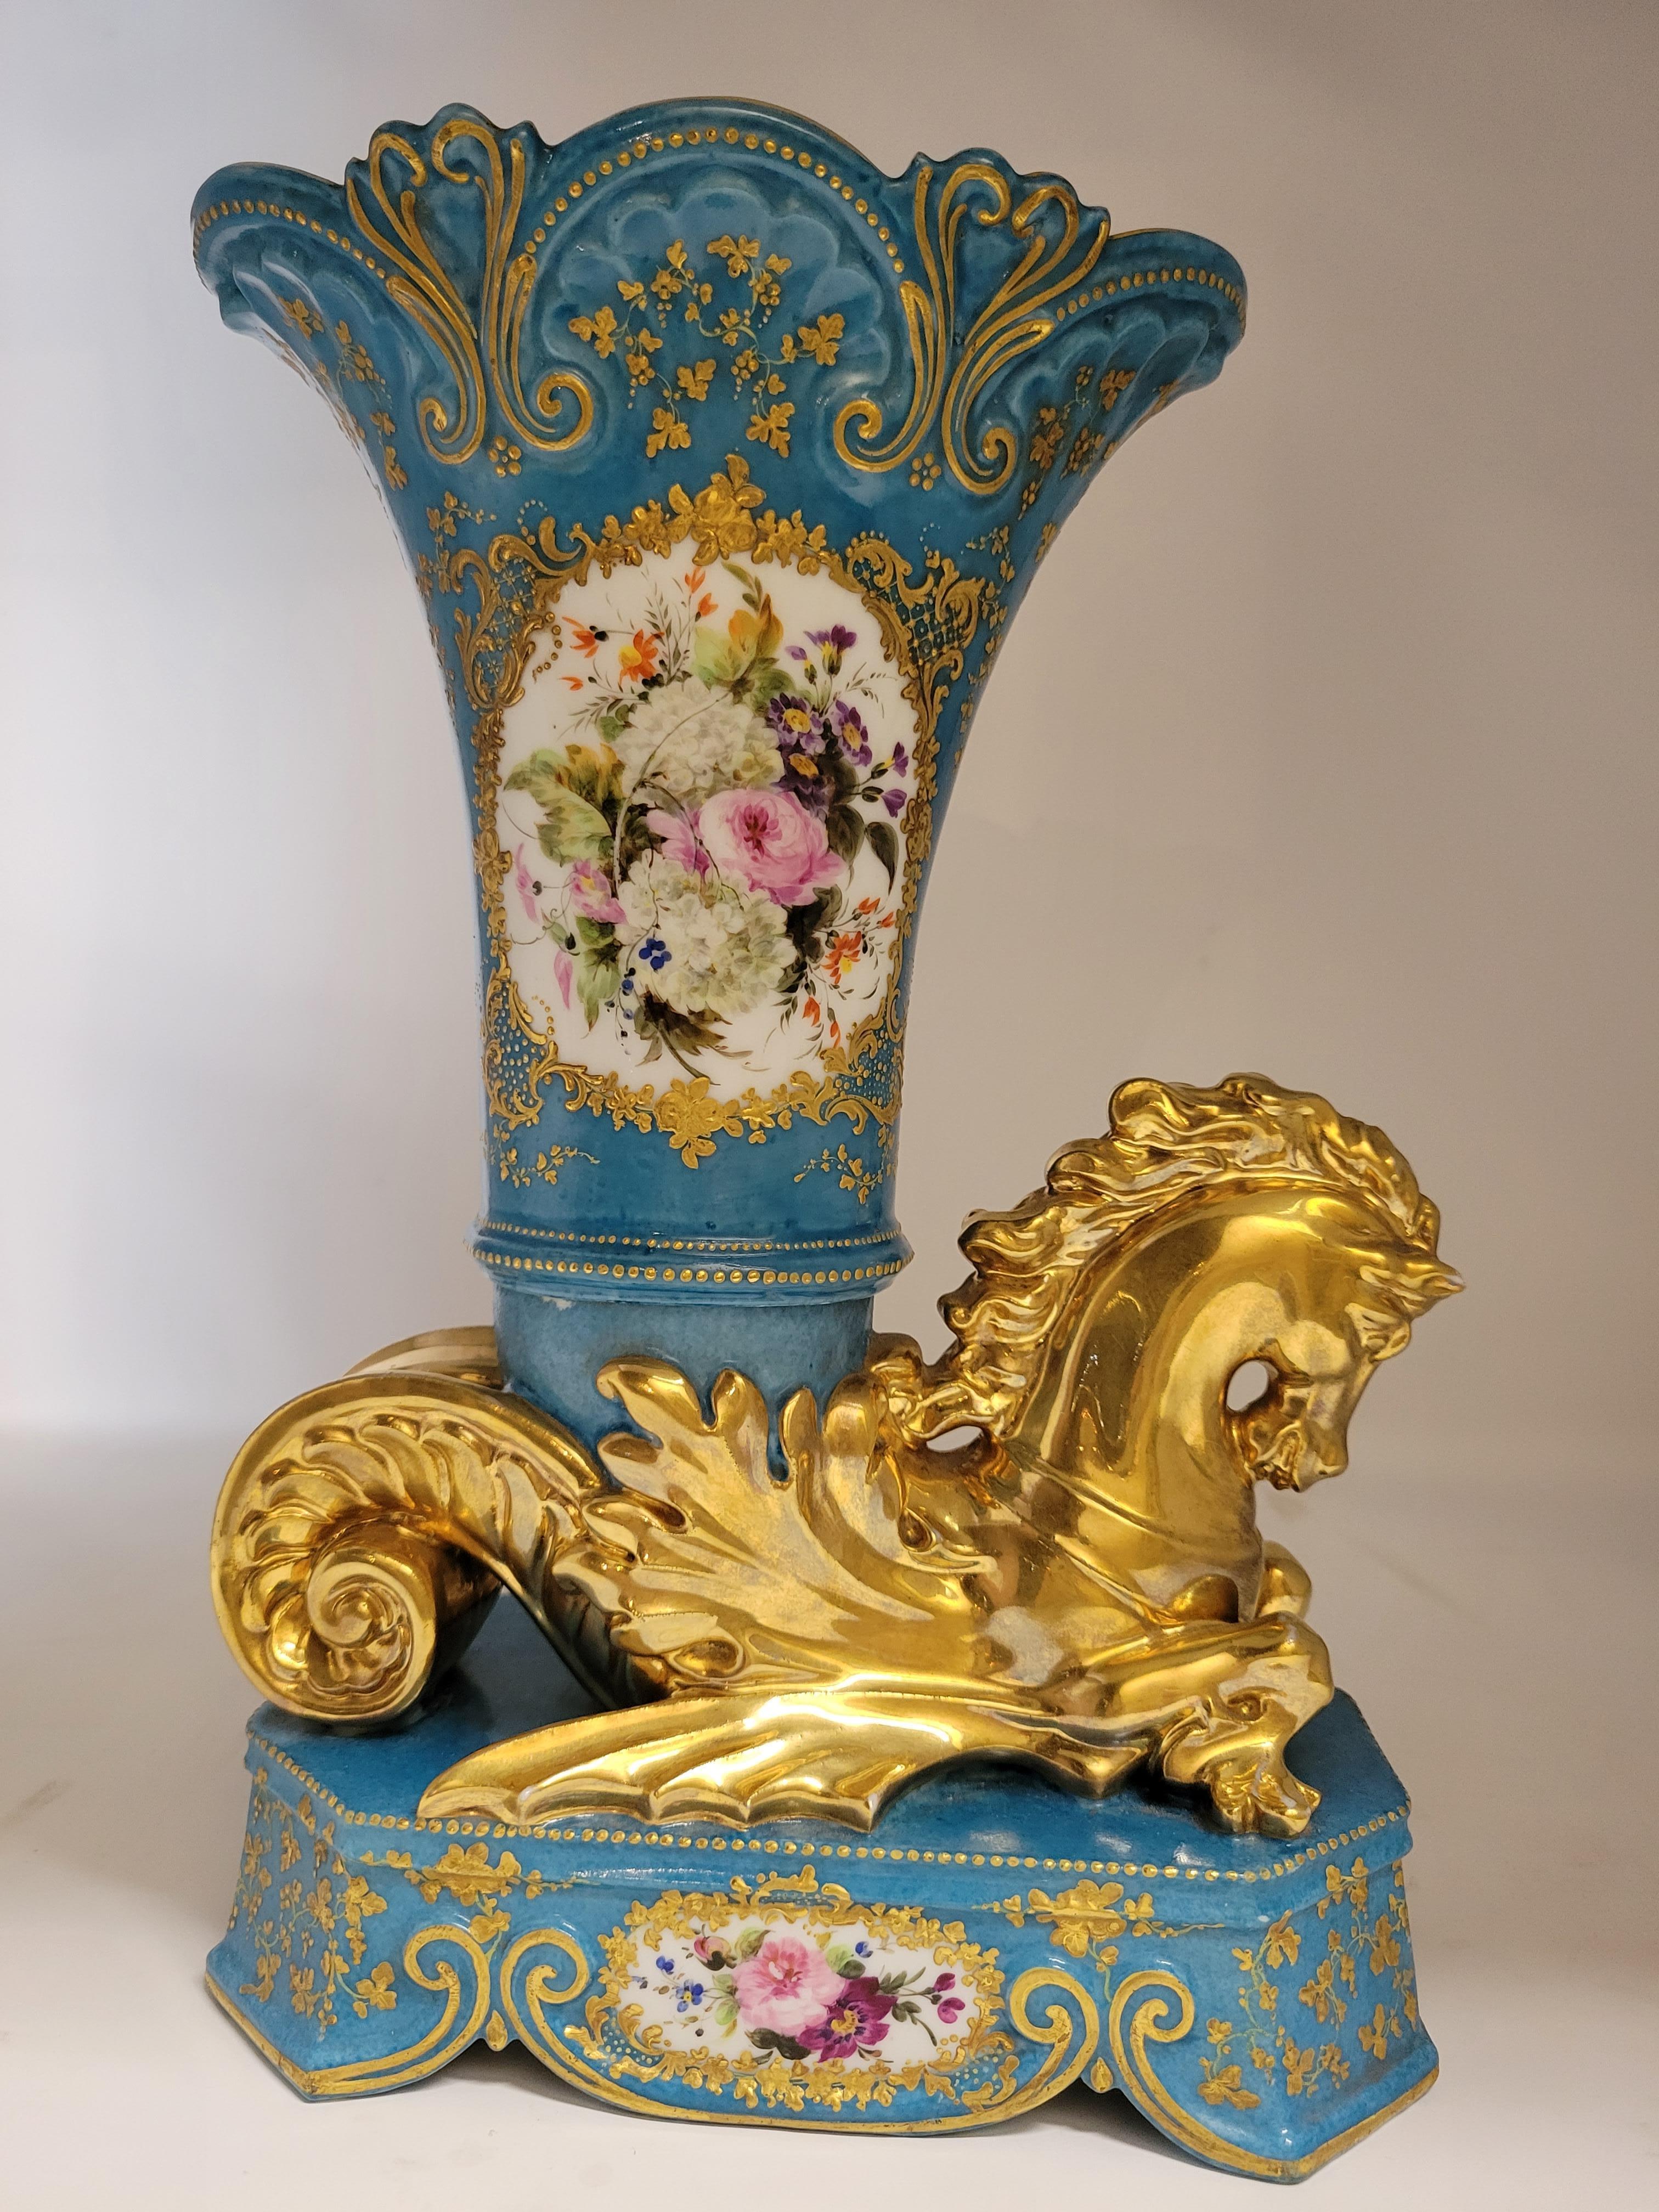 This pair of vases is appealing with its combination of colors, the nice shade of blue, the floral decorative elements and the lions above the pedestal bases.